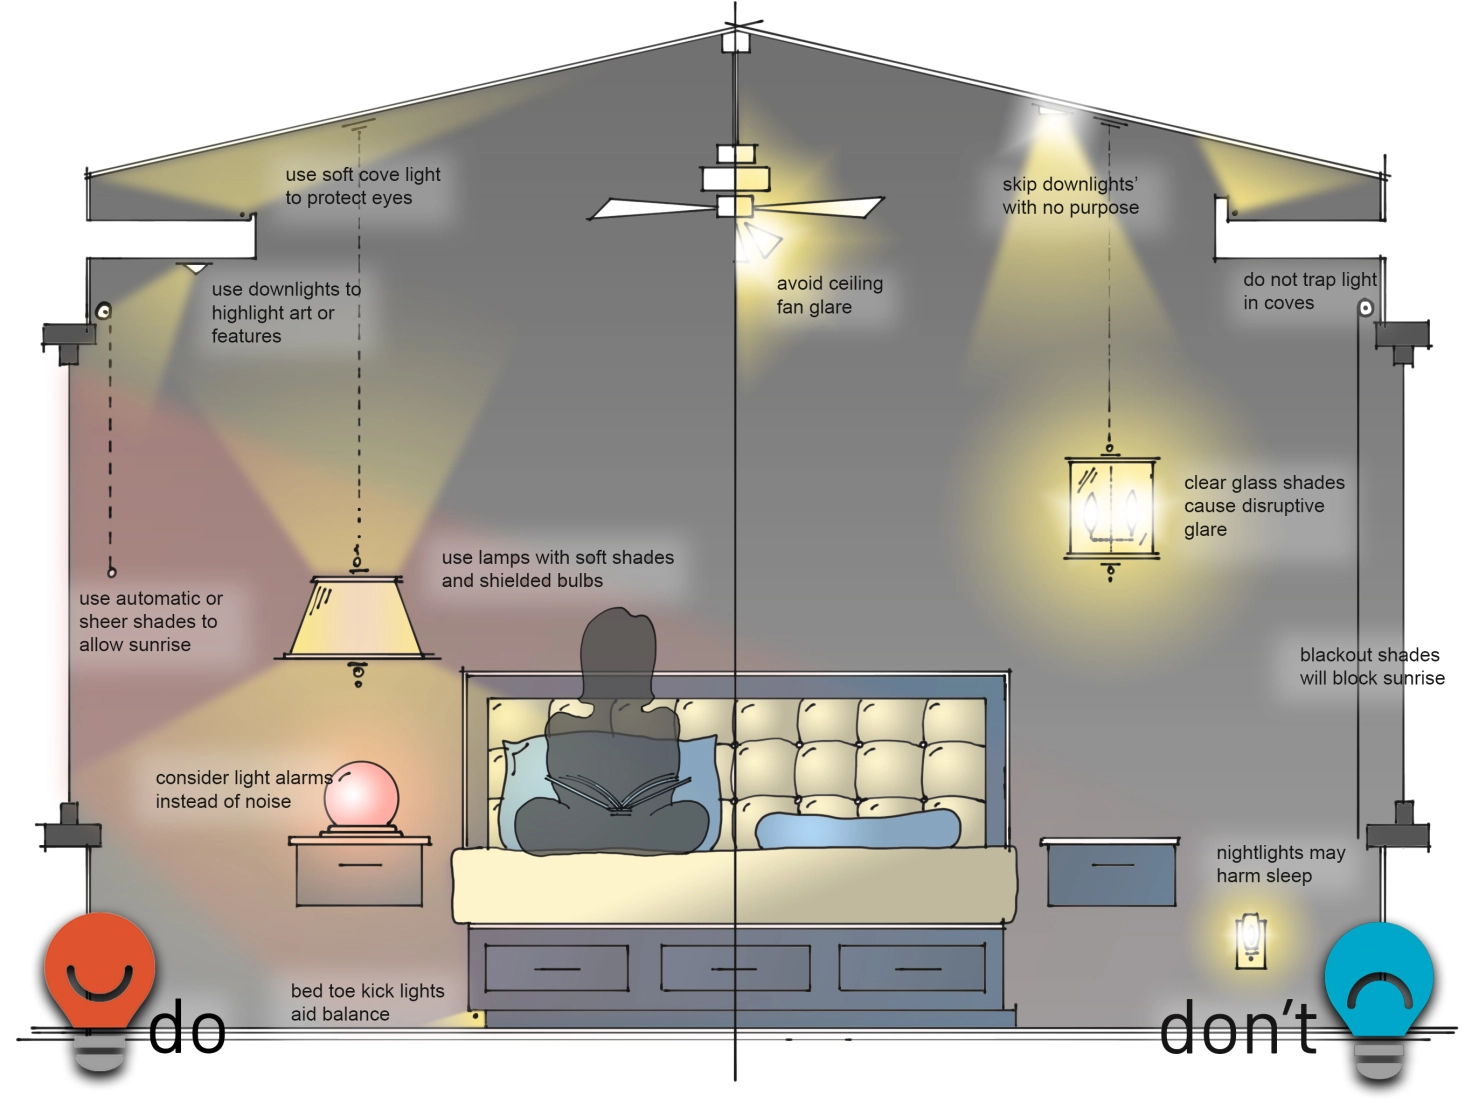 An illustration of a bedroom with lighting dos on the left and lighting donts on the right.